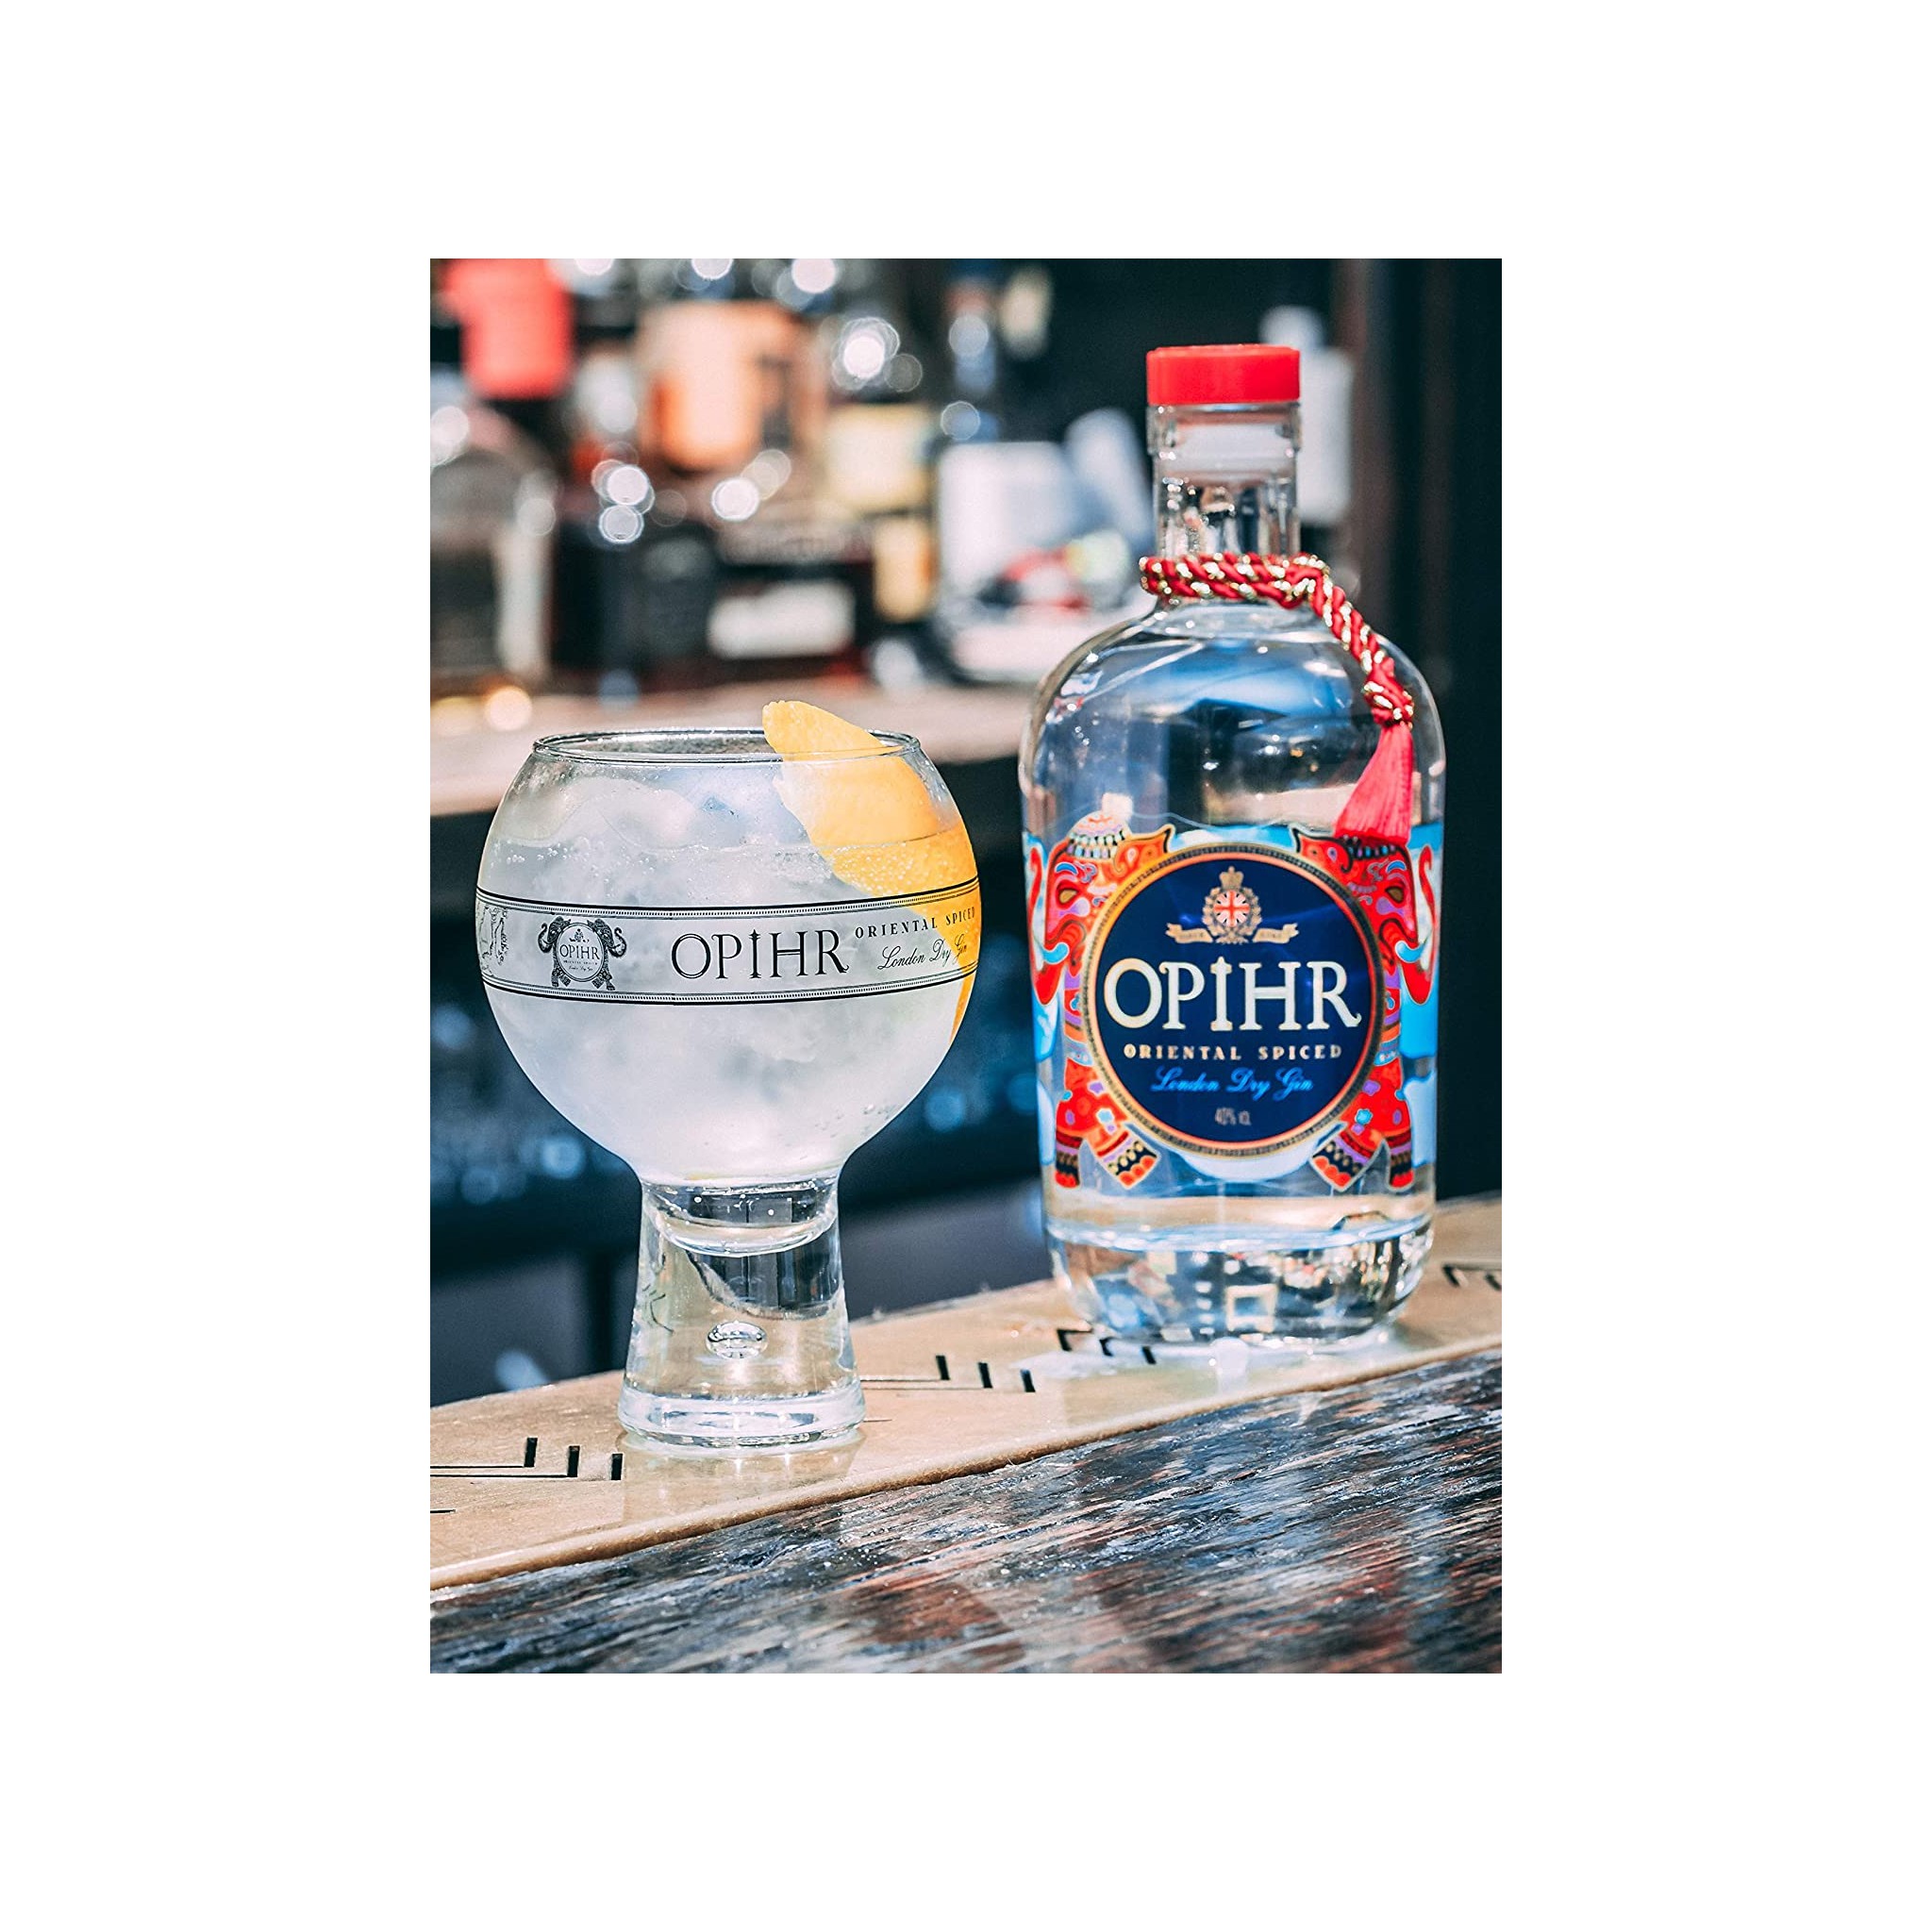 Shop online Opihr Gin, dry Online best botanical Gin. Ophir and sales london Quality! price gin. Indian